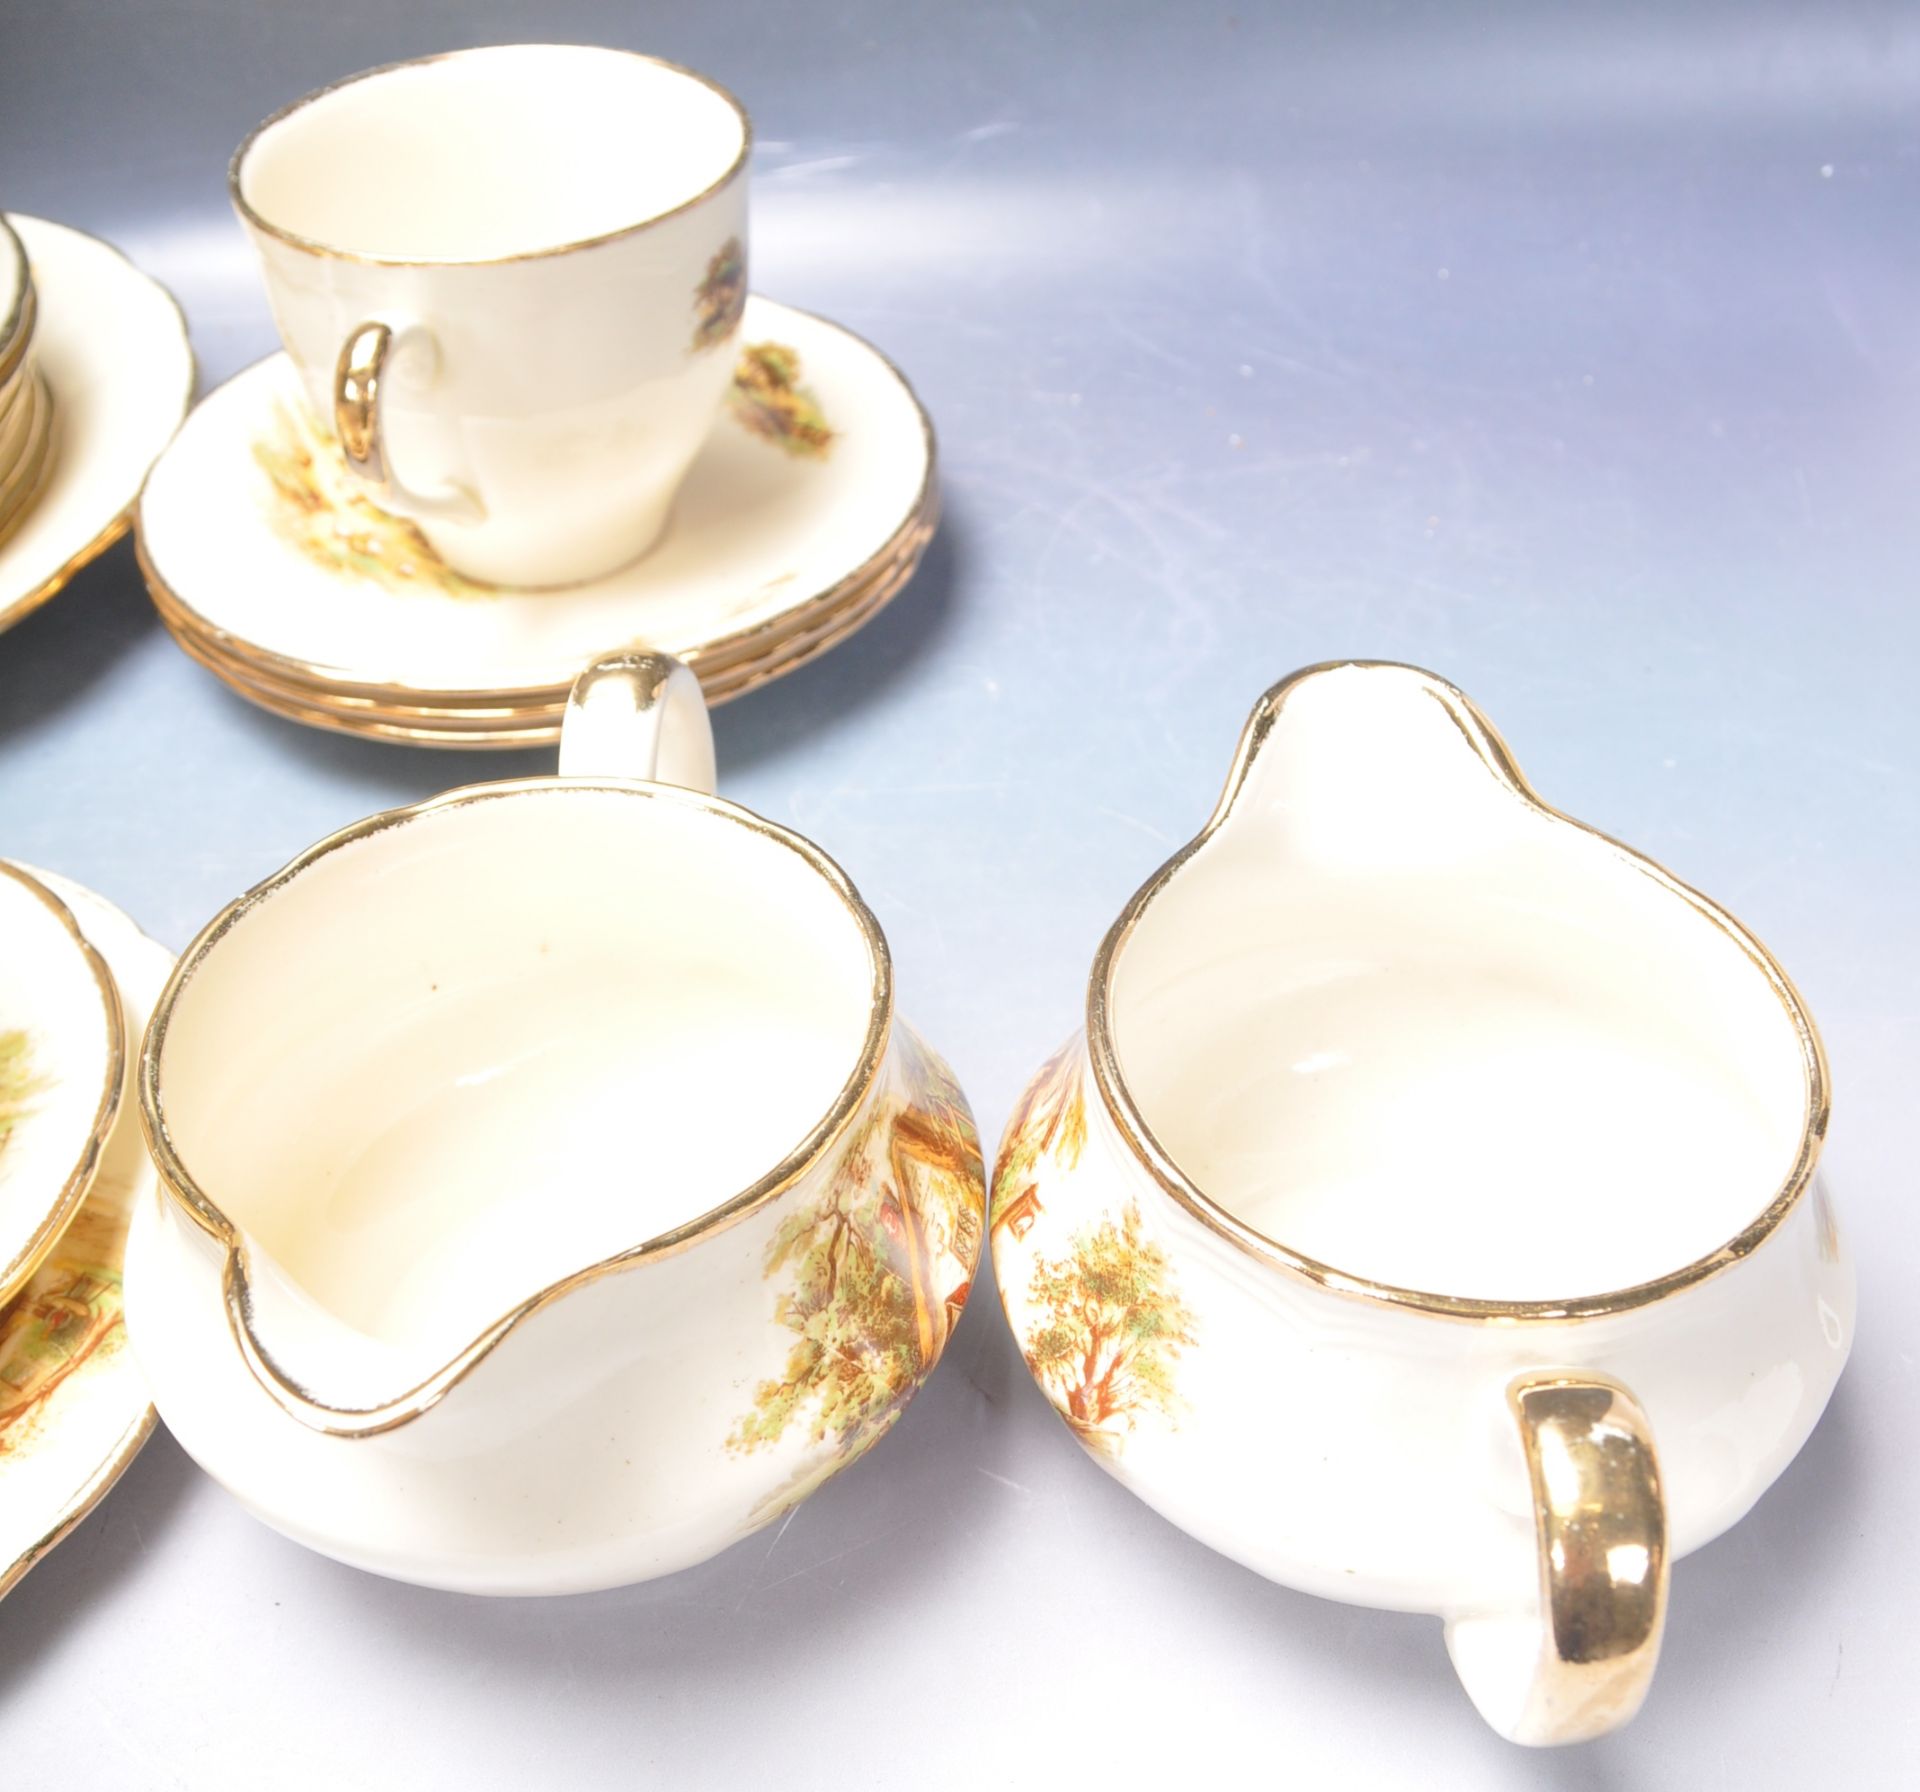 VINTAGE 2OTH CENTURY ALFRED MEAKIN AND SONS TEA SERVICE - Image 4 of 7